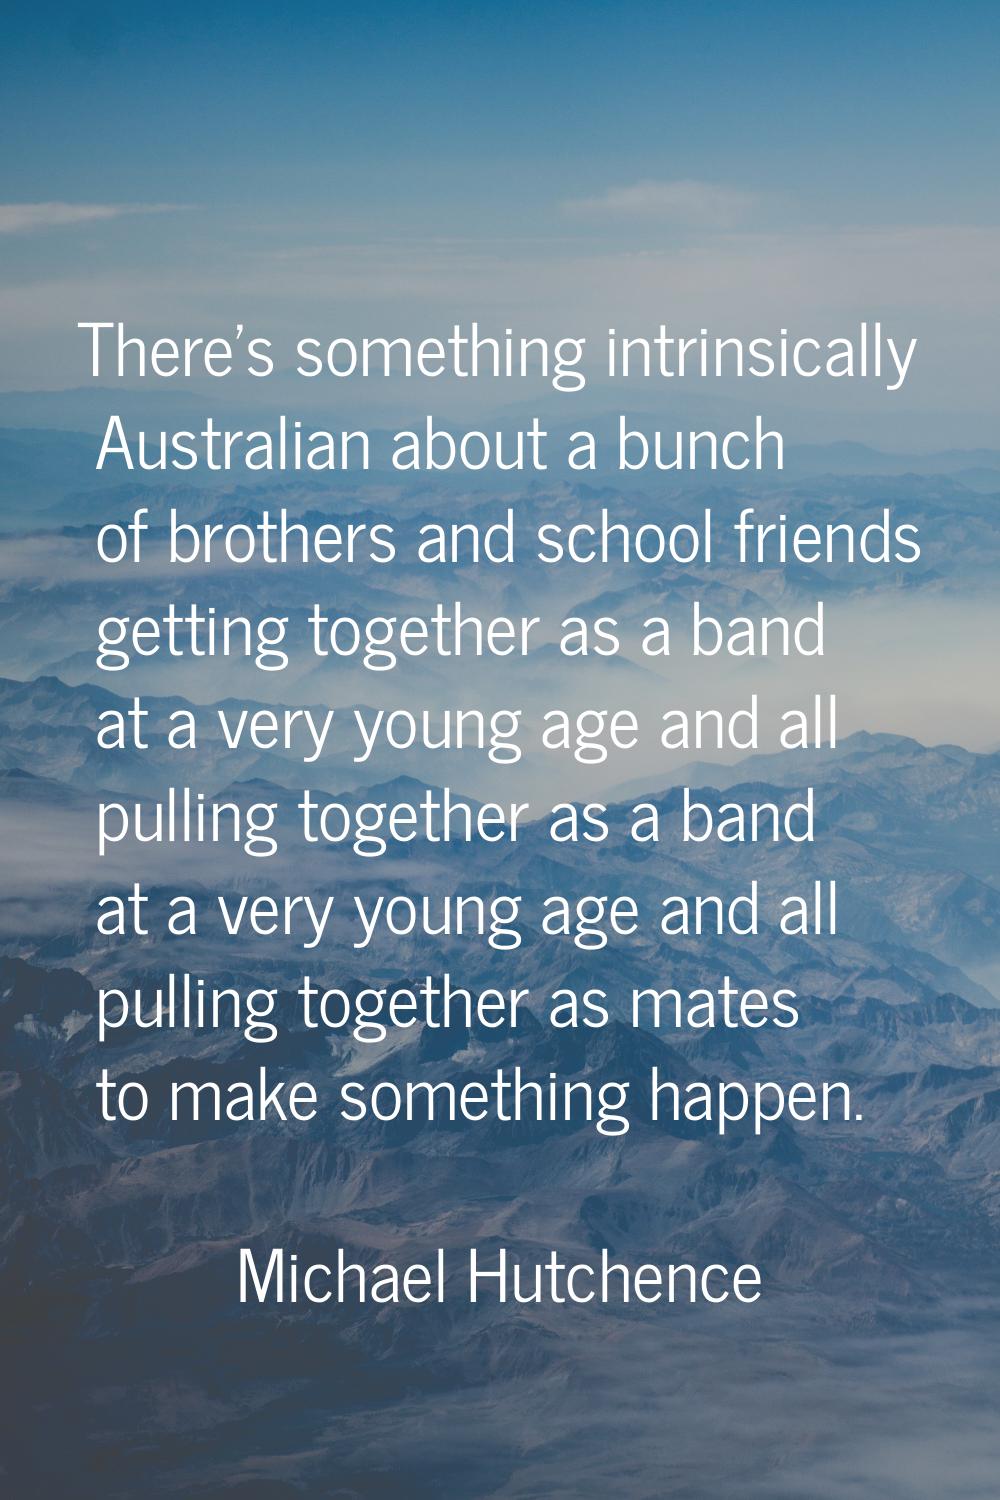 There's something intrinsically Australian about a bunch of brothers and school friends getting tog